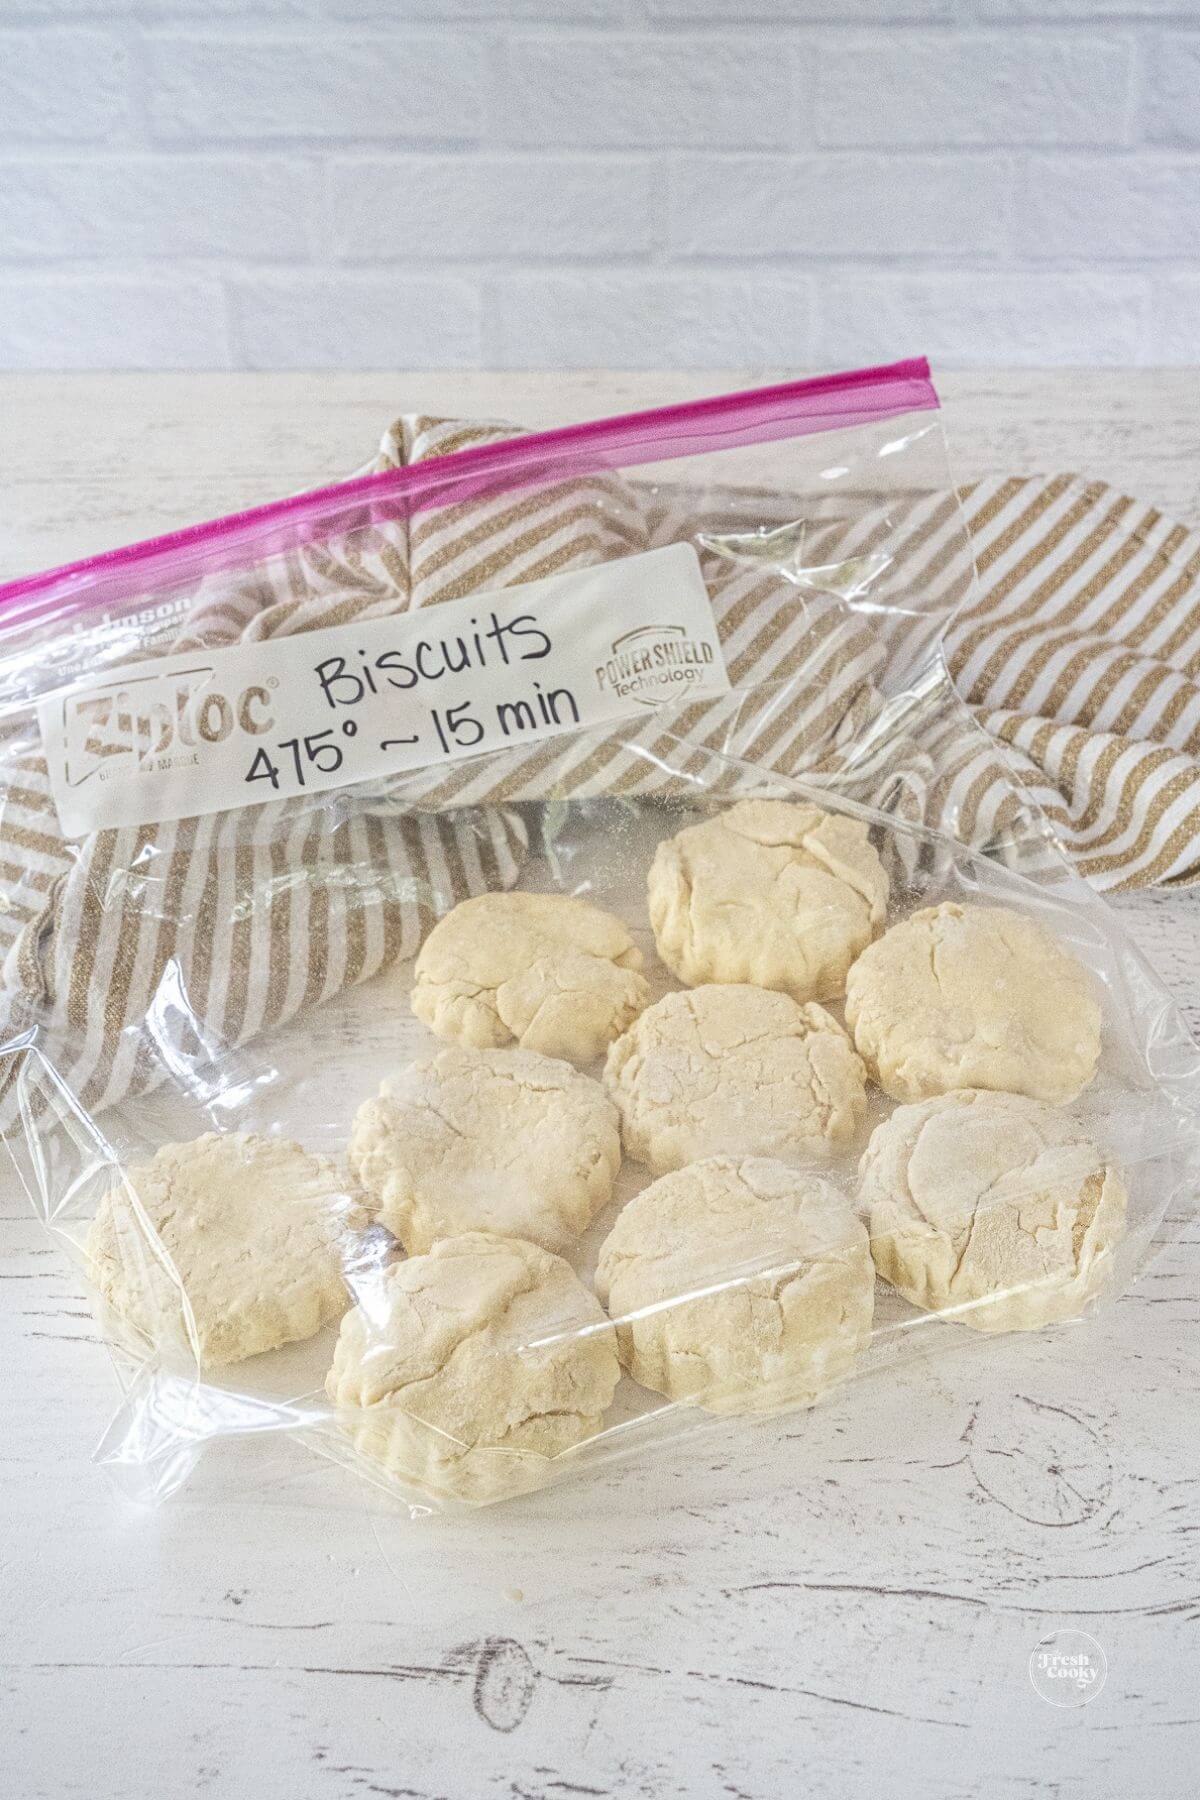 Frozen biscuits in a labeled freezer baggie.